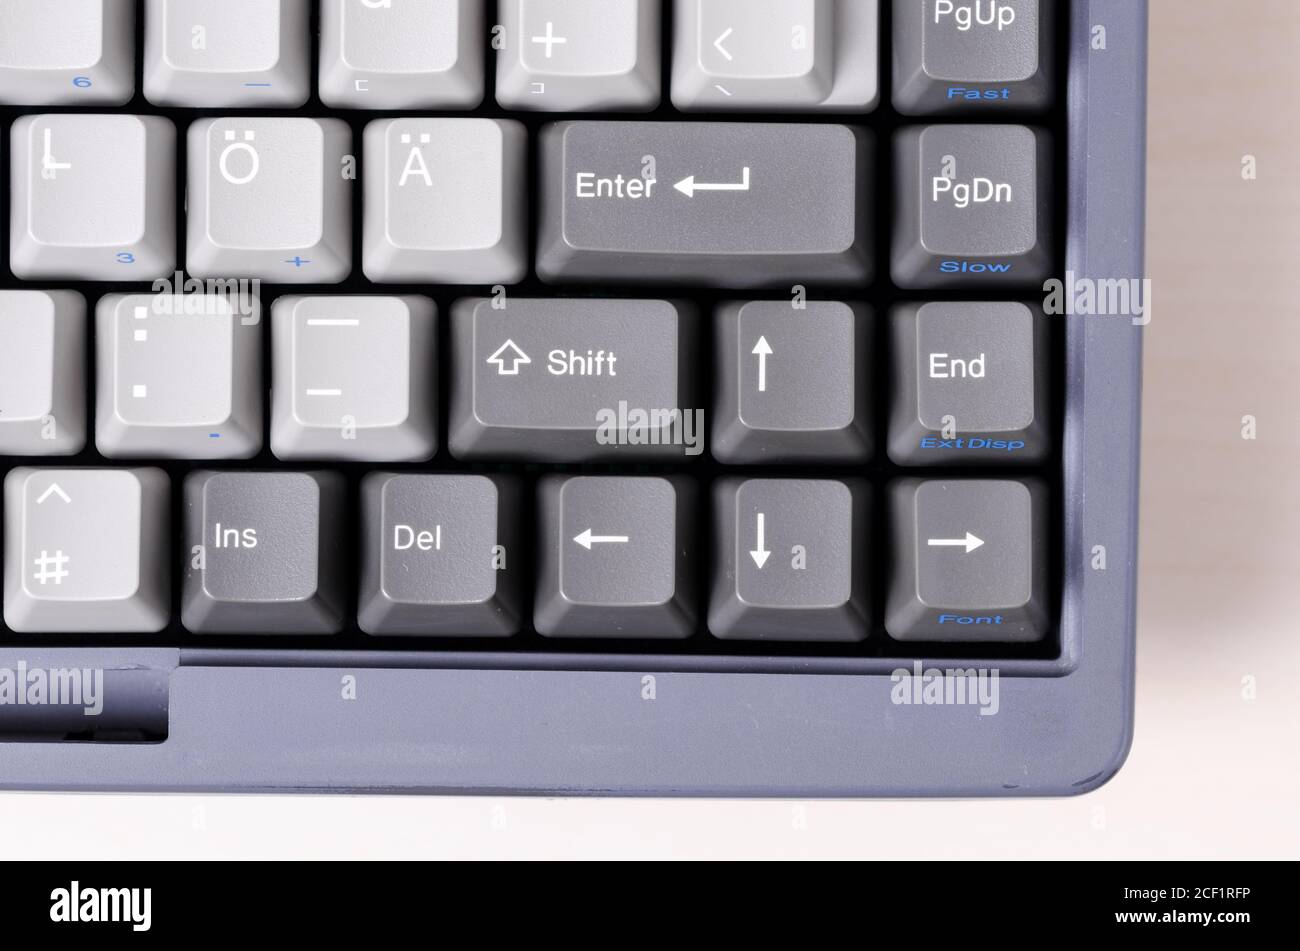 Vintage, obsolete, old PC Computer Laptop Keyboard, close-up. macro, grey shift and enter keys with symbols, arrows, indoors studio Stock Photo